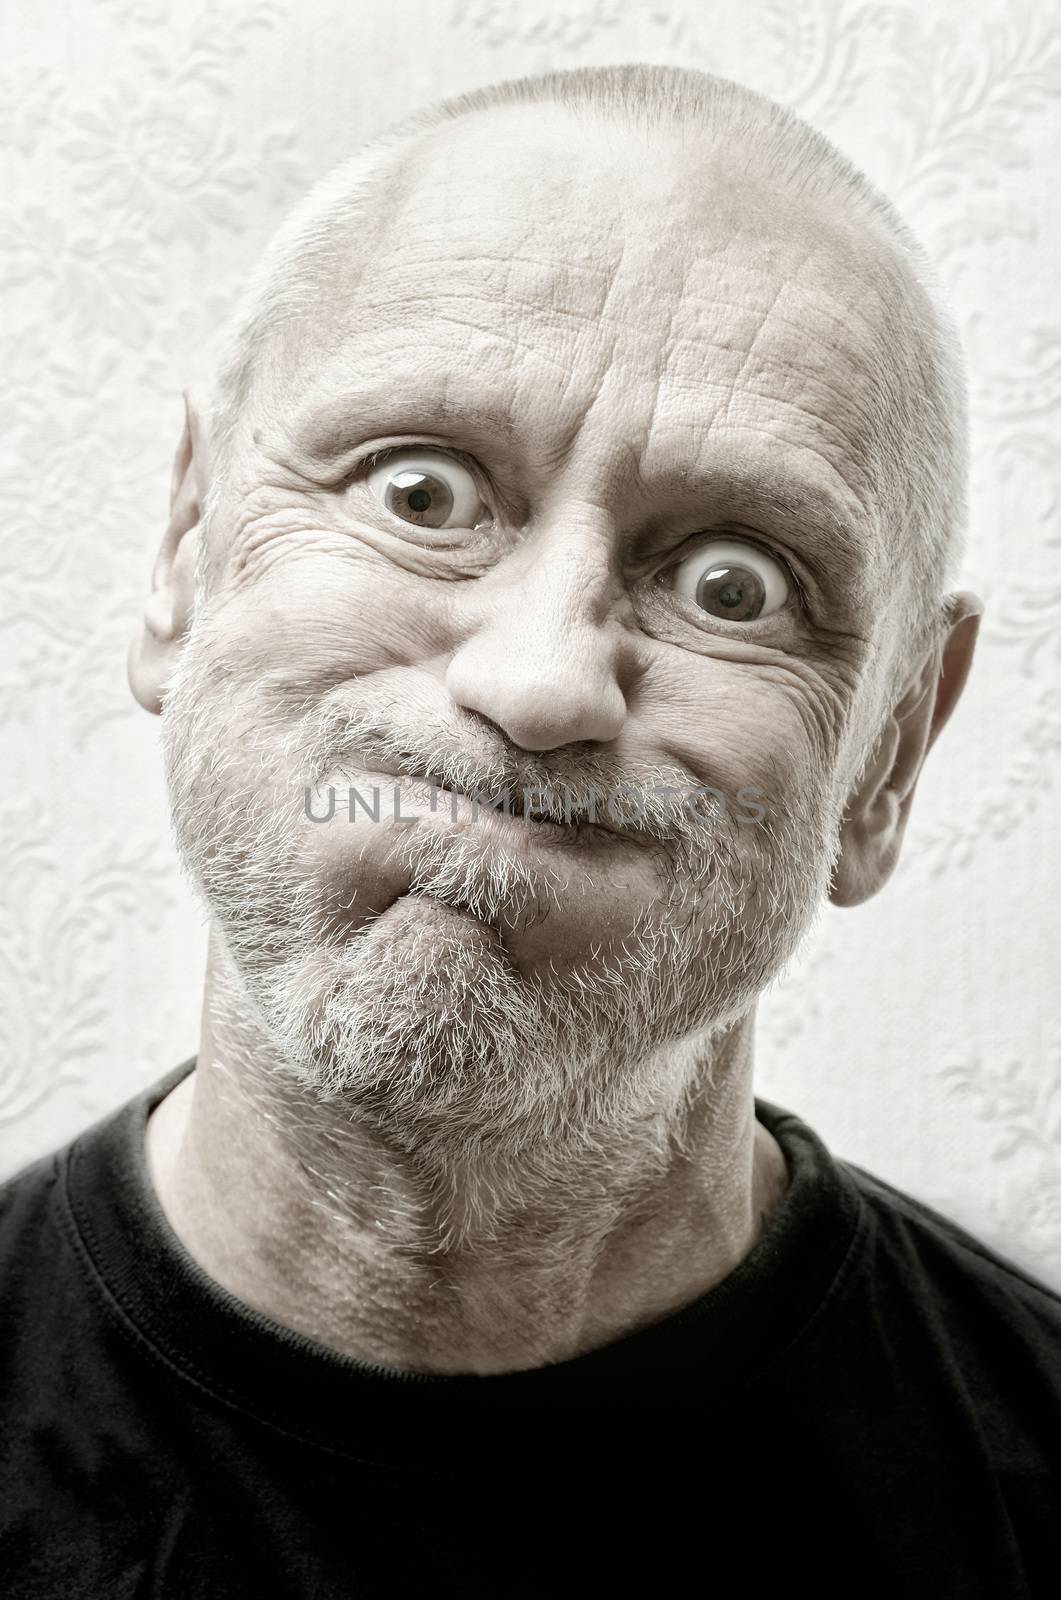 Black and white portrait of a funny and crazy caucasian man making faces with eyes round like balls and puffy cheeks